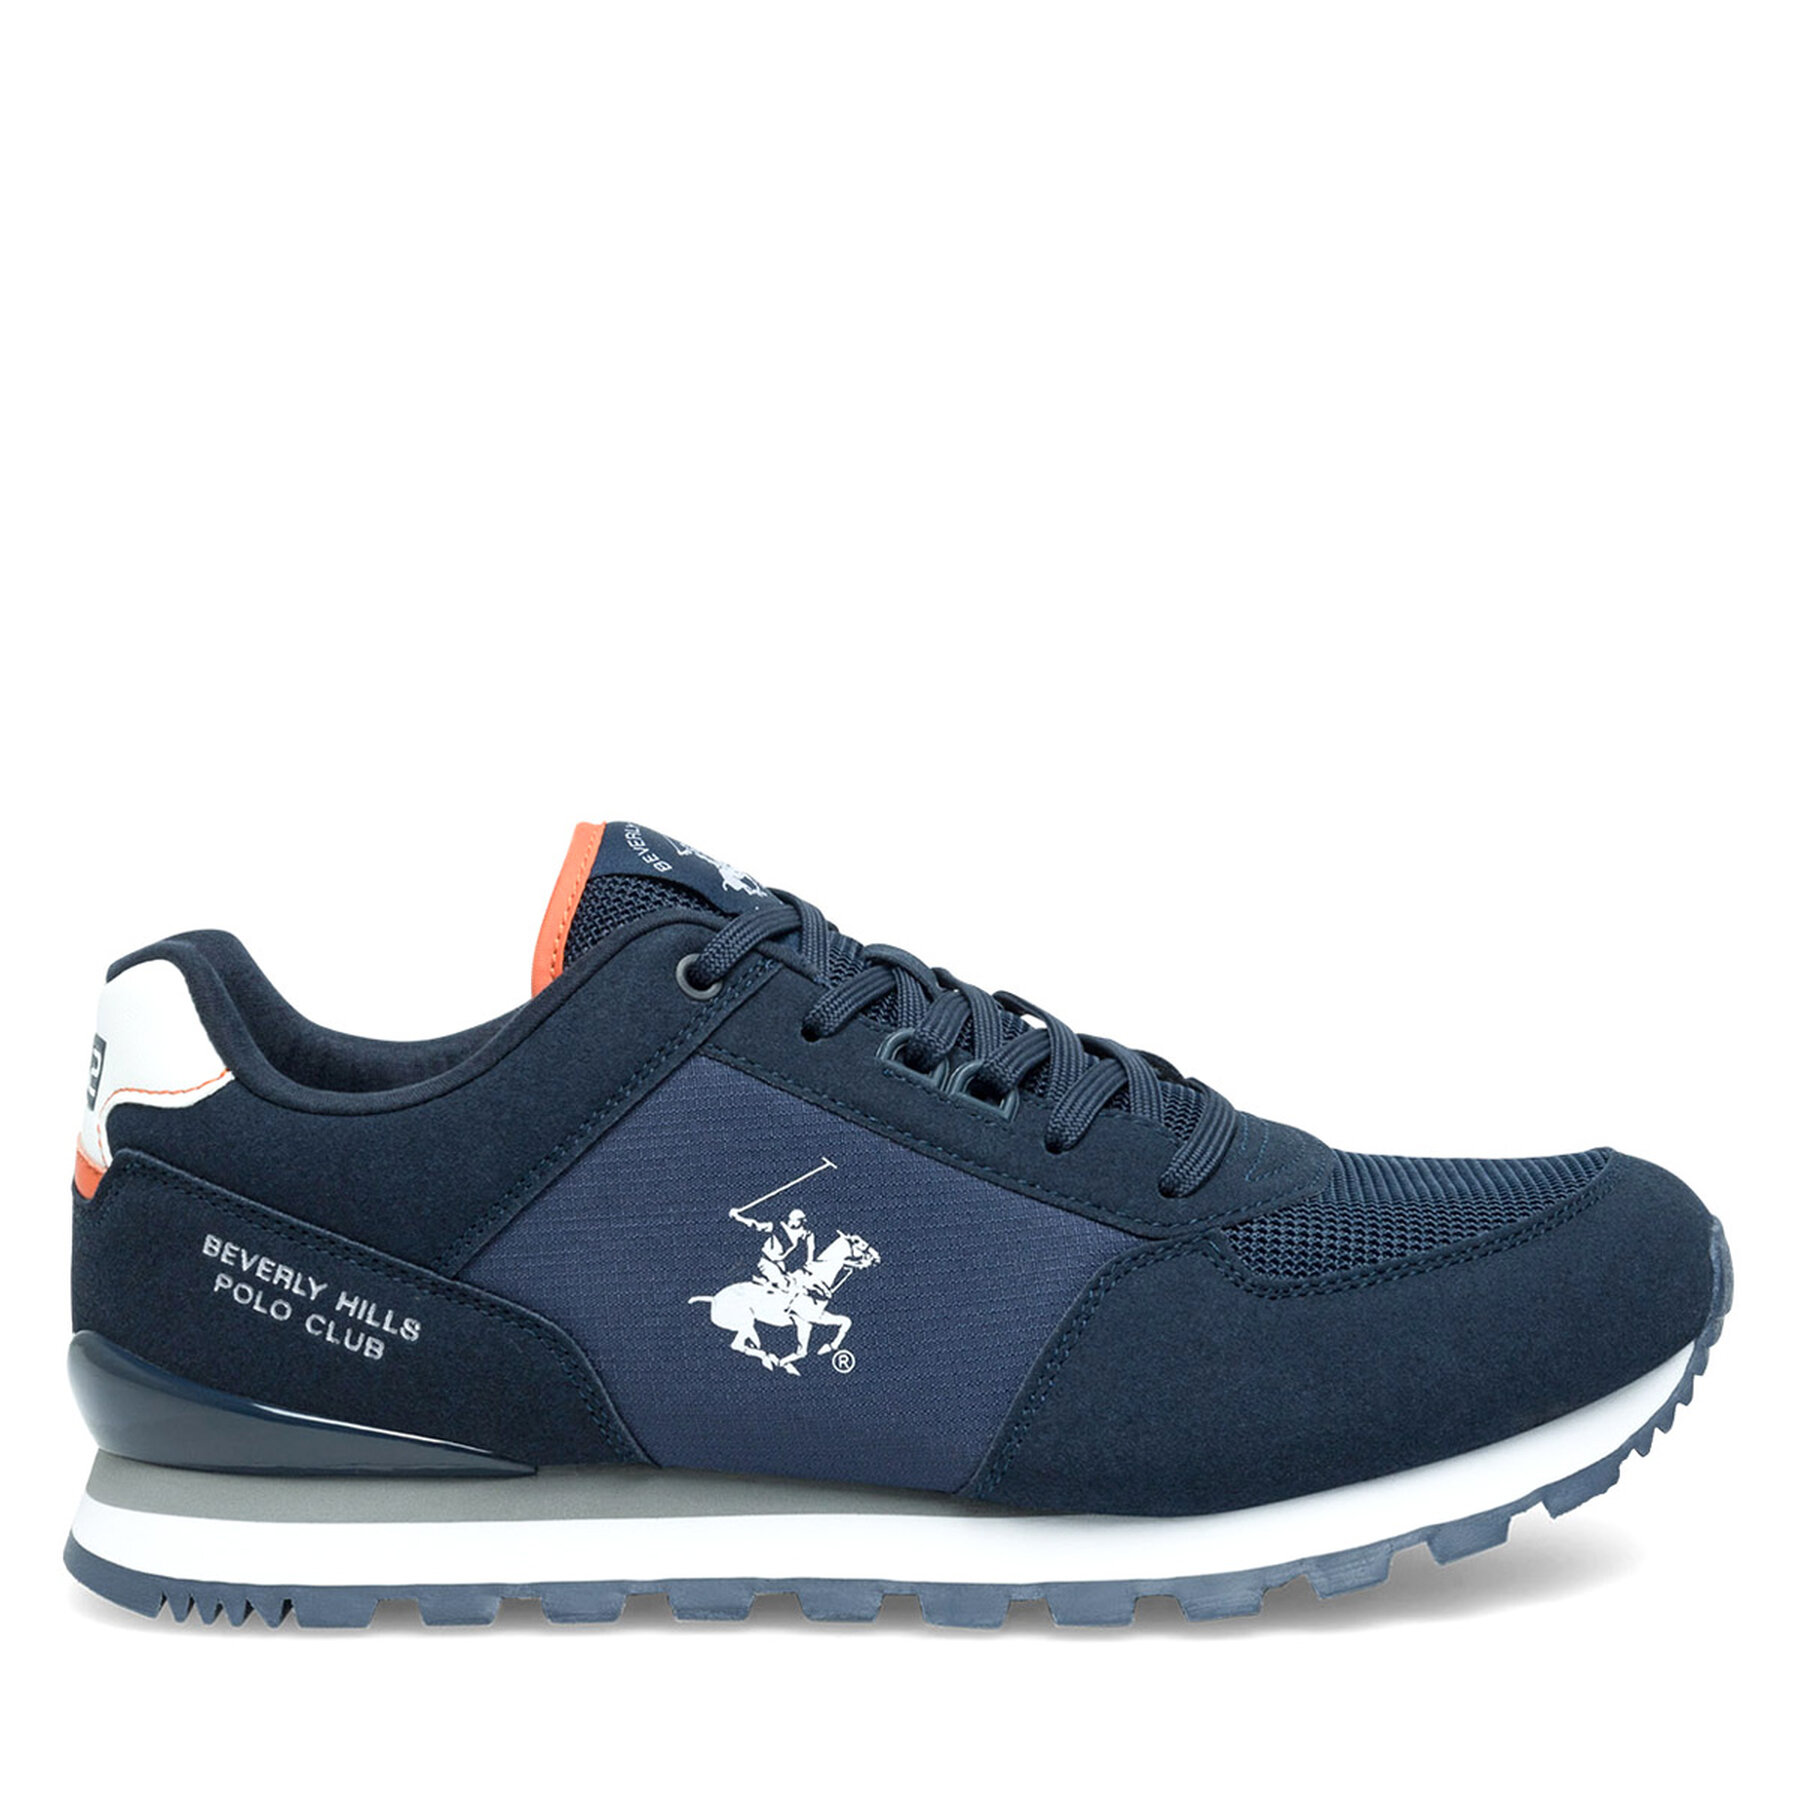 Sneakers Beverly Hills Polo Club MP07-01450-04B Dunkelblau von Beverly Hills Polo Club